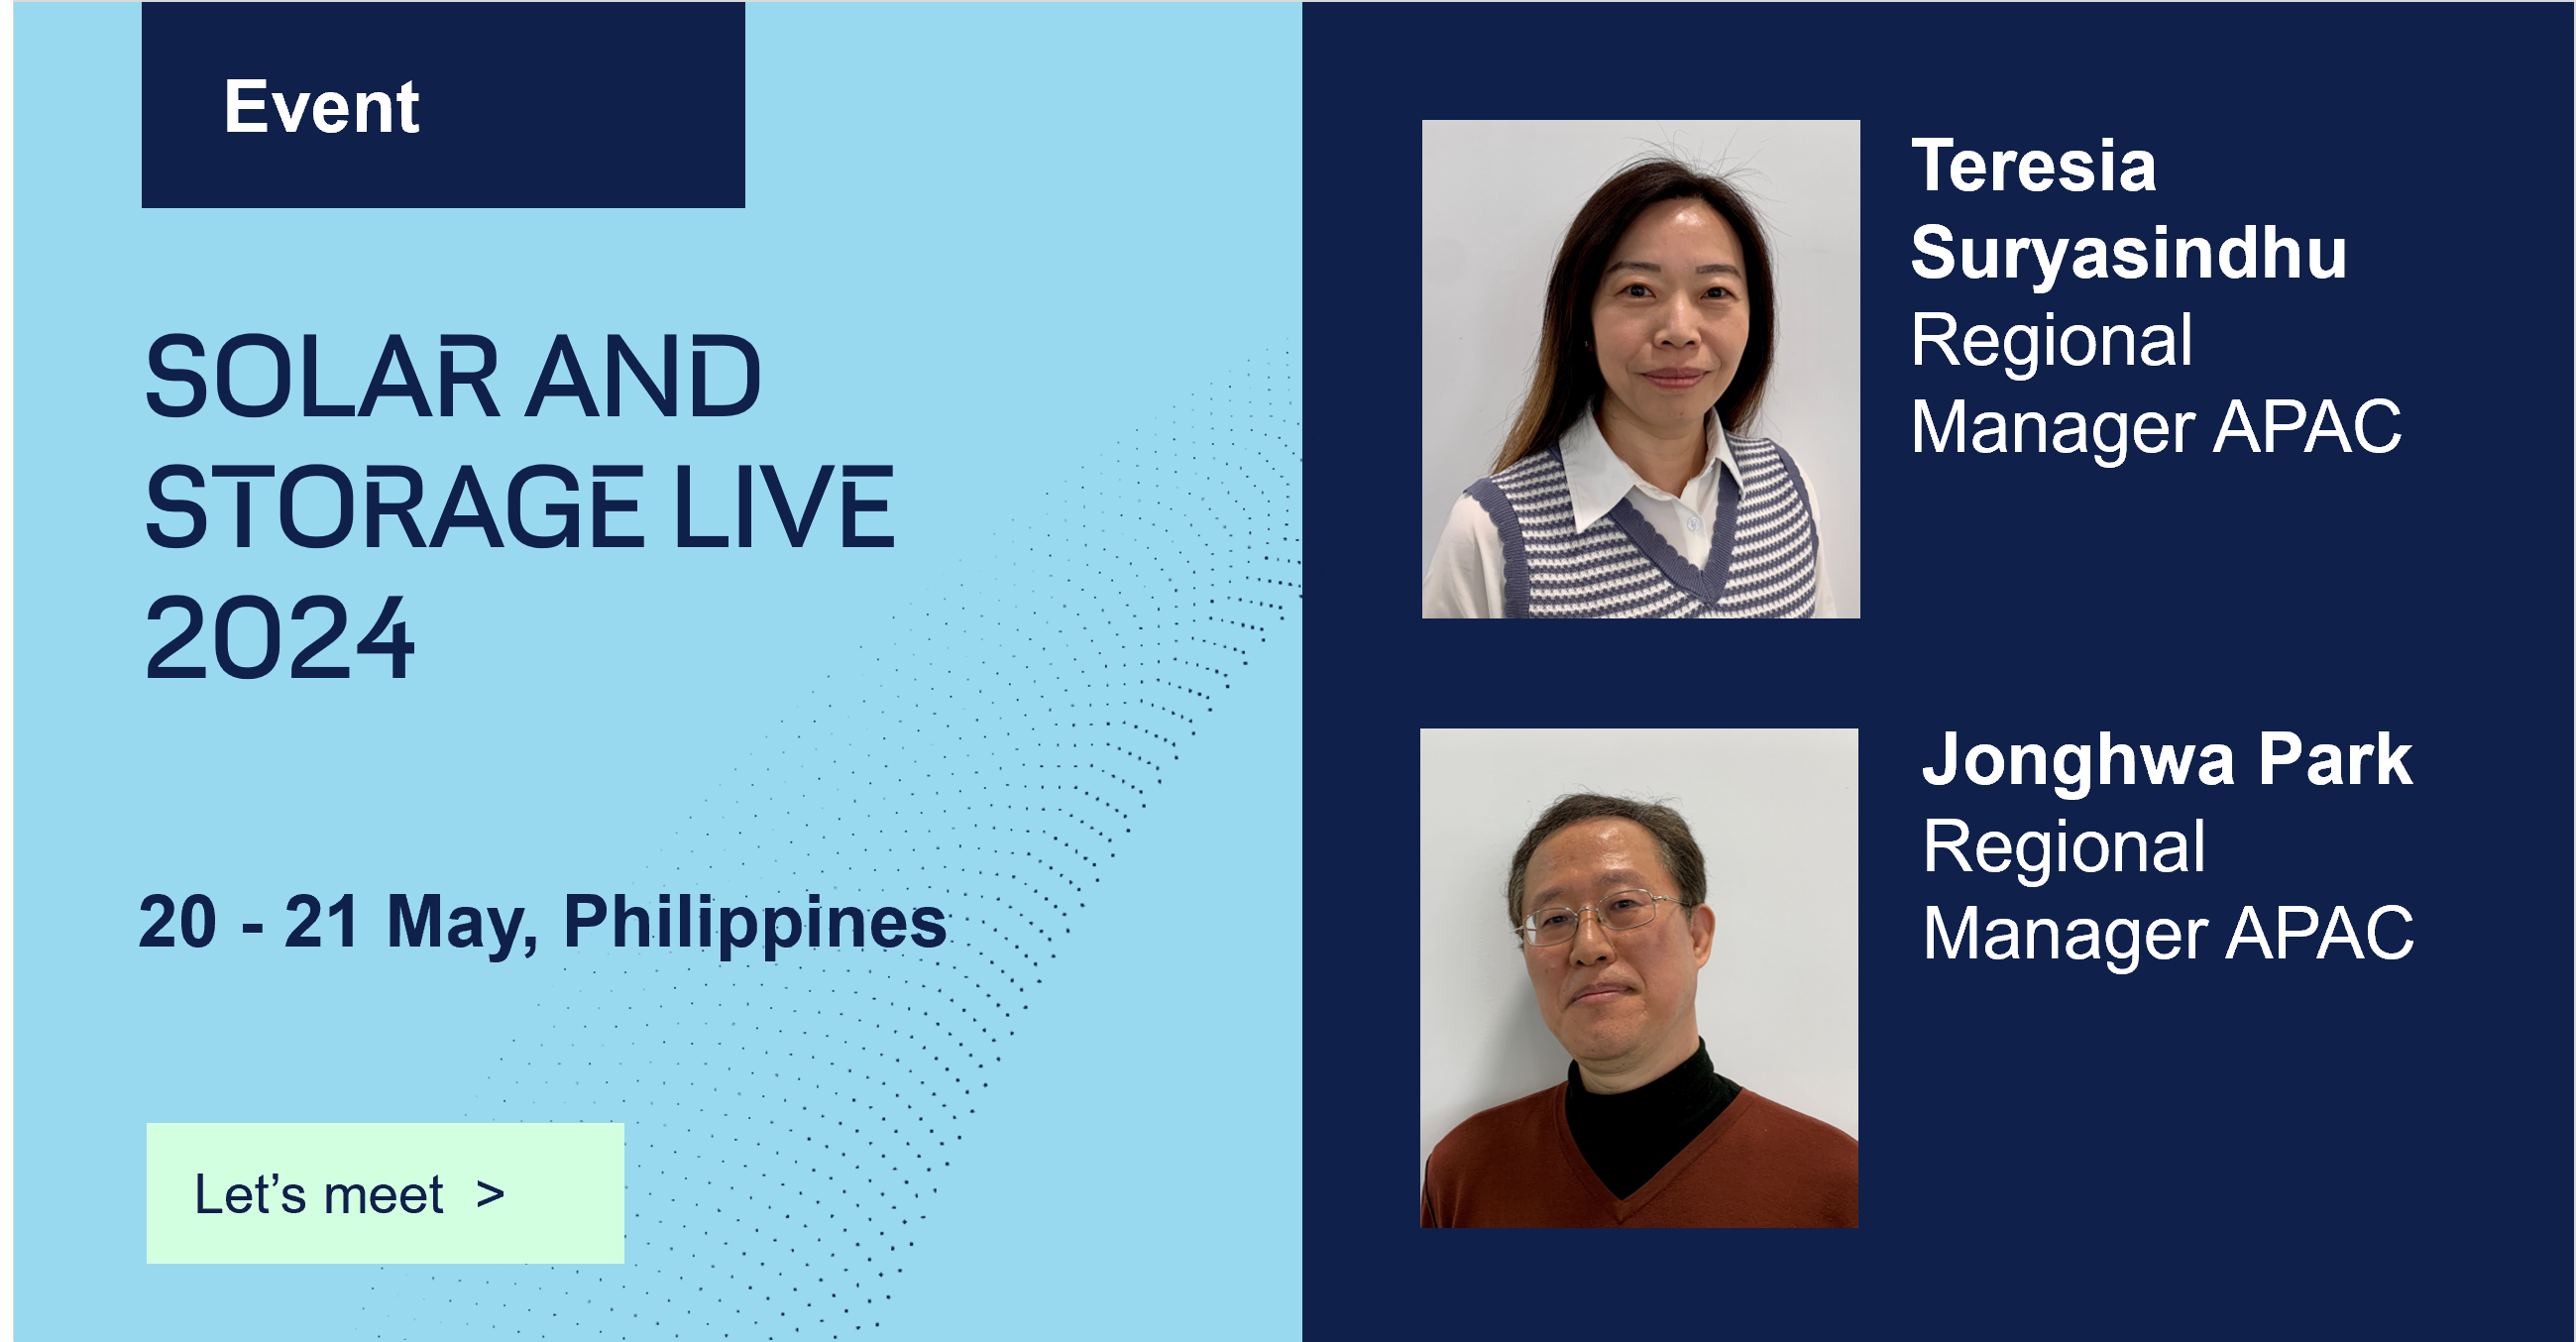 GreenPowerMonitor will attend Solar and Storage LIVE  2024 in Phillipines